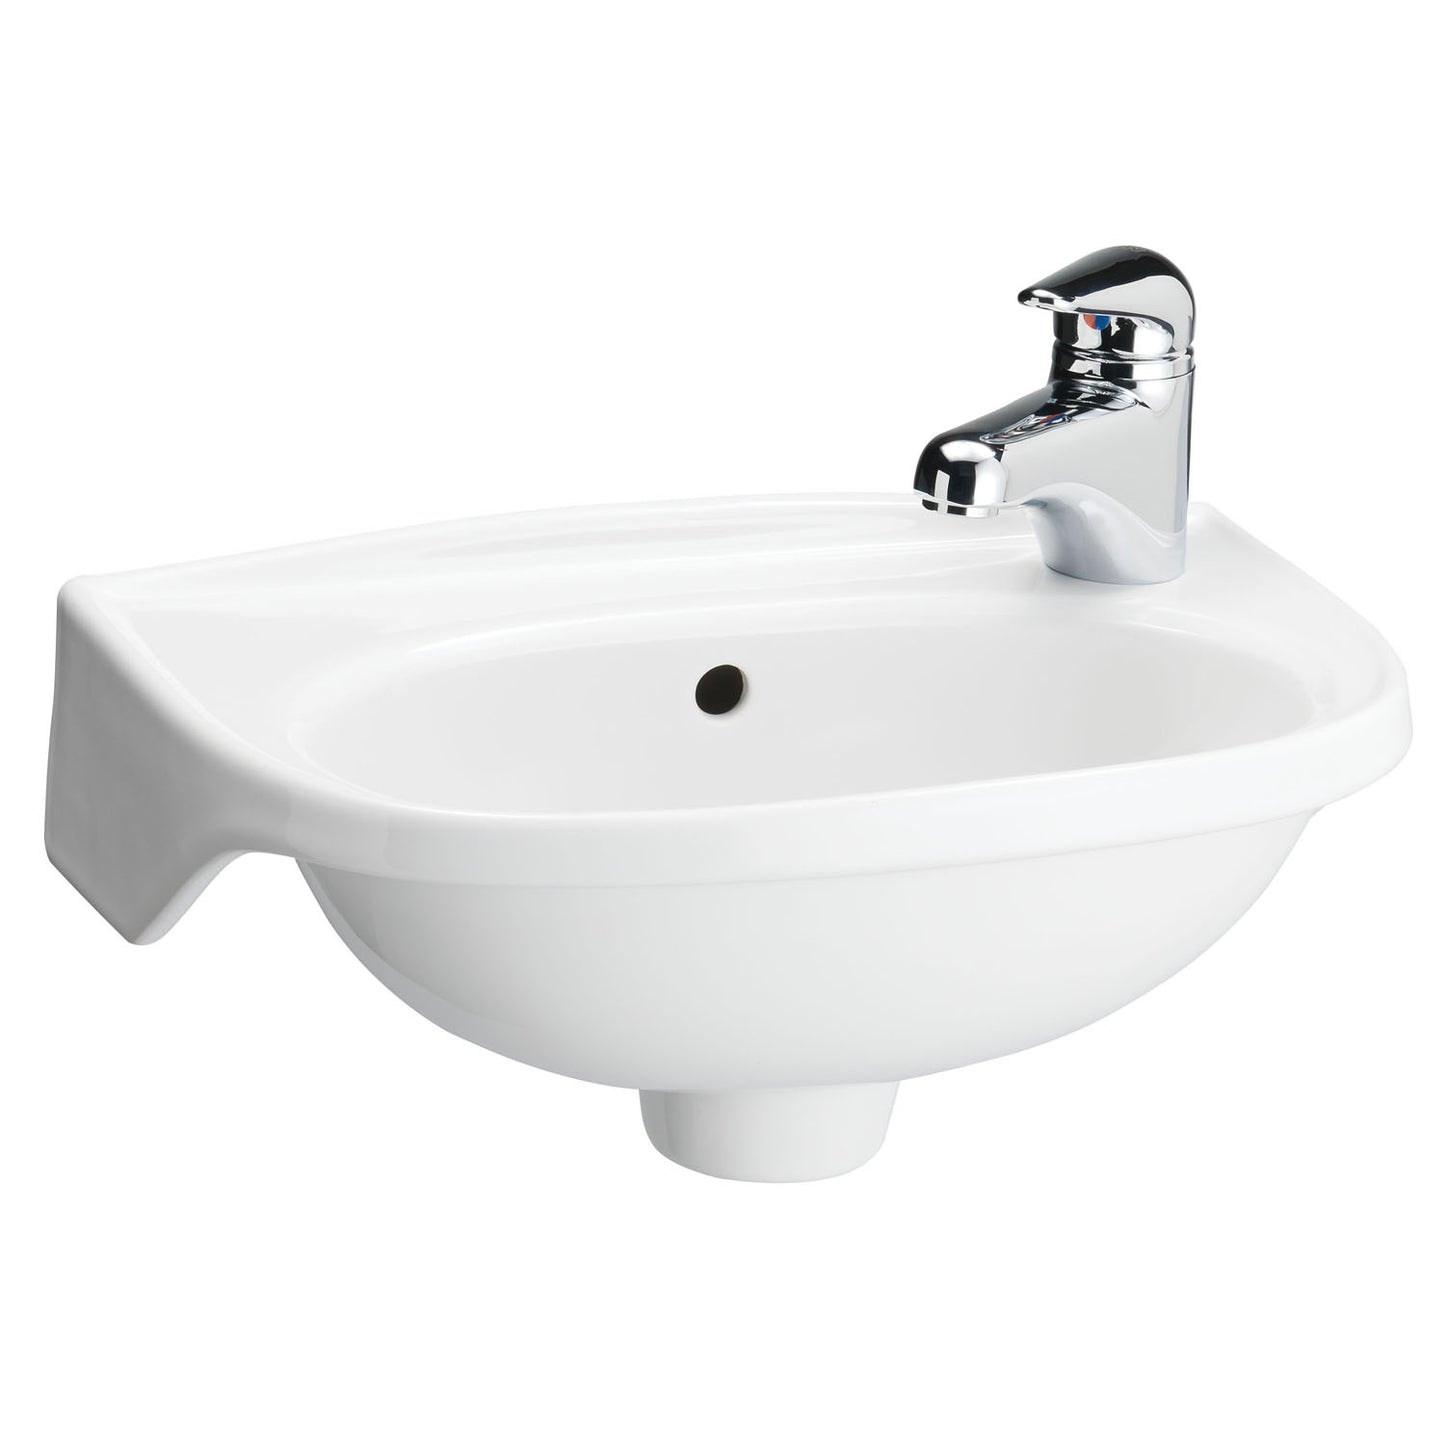 Tina Wall Hung Sink in Bisque for Right-Hand Faucet